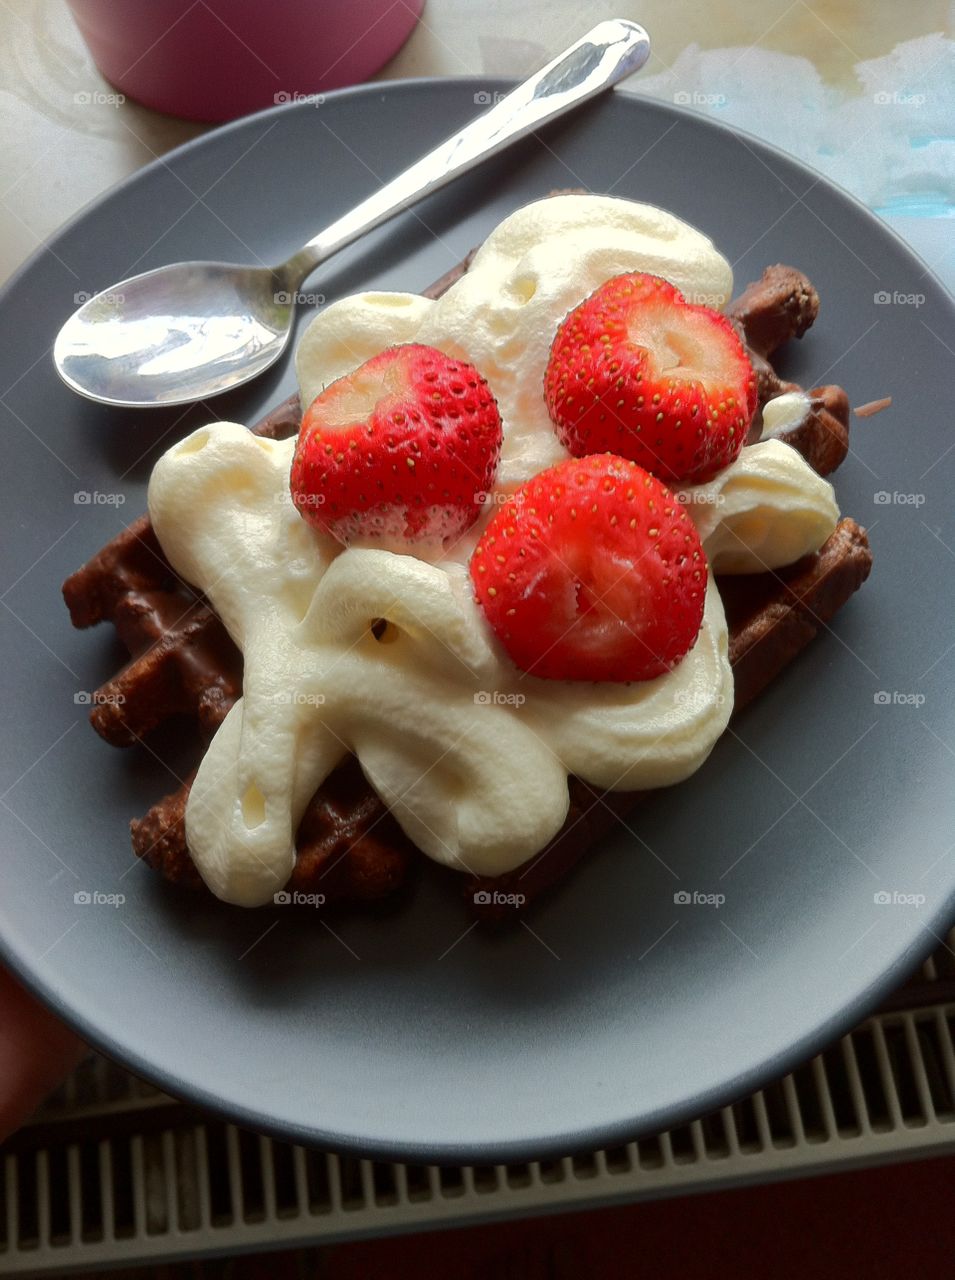 My own homemade waffle with strawberry 